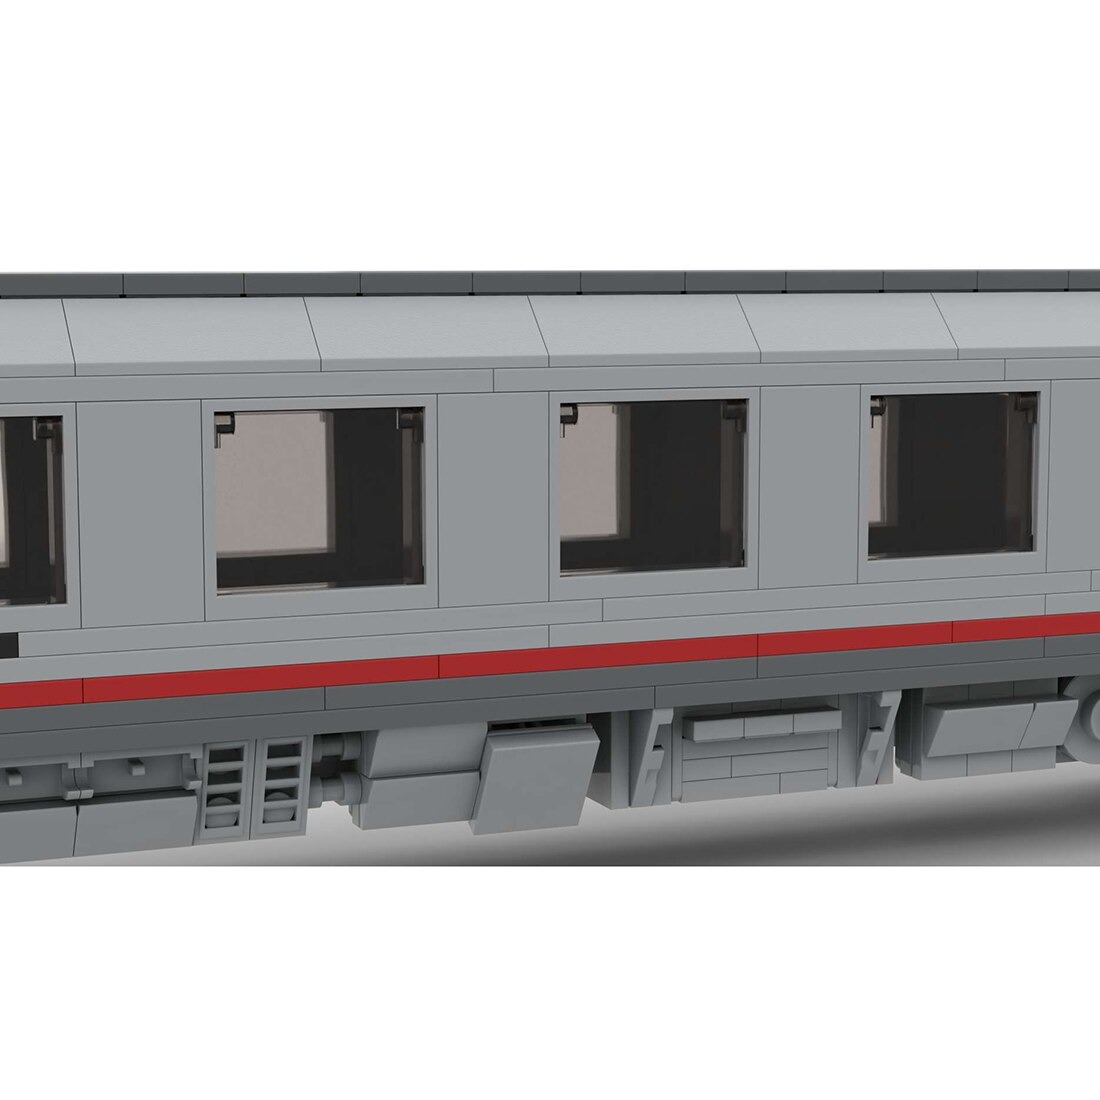 Genuine 6wide Static Edition Sleeping Car MOC-67867 Technic With 682pcs